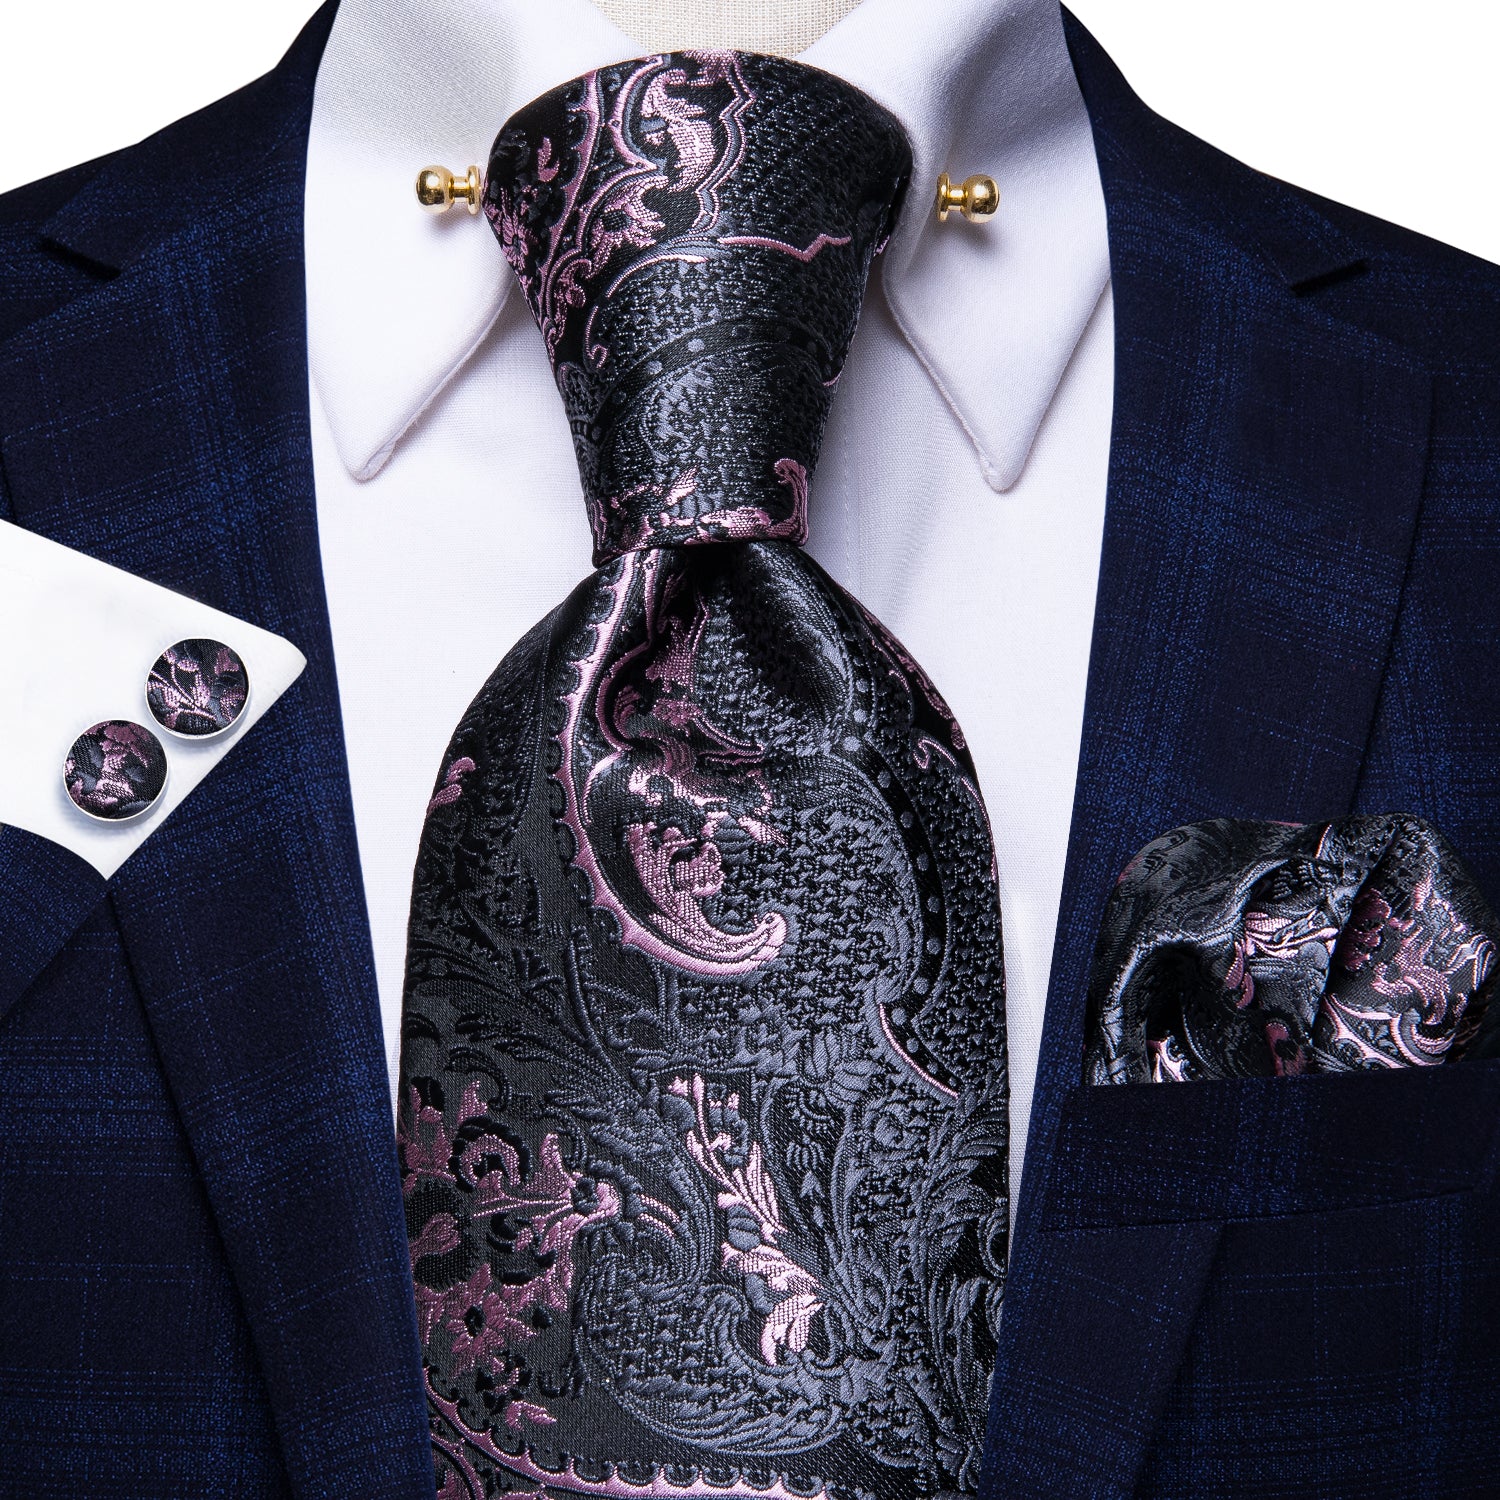 Grey Pink Paisley Necktie Pocket Square Cufflinks Set with Collar Pin